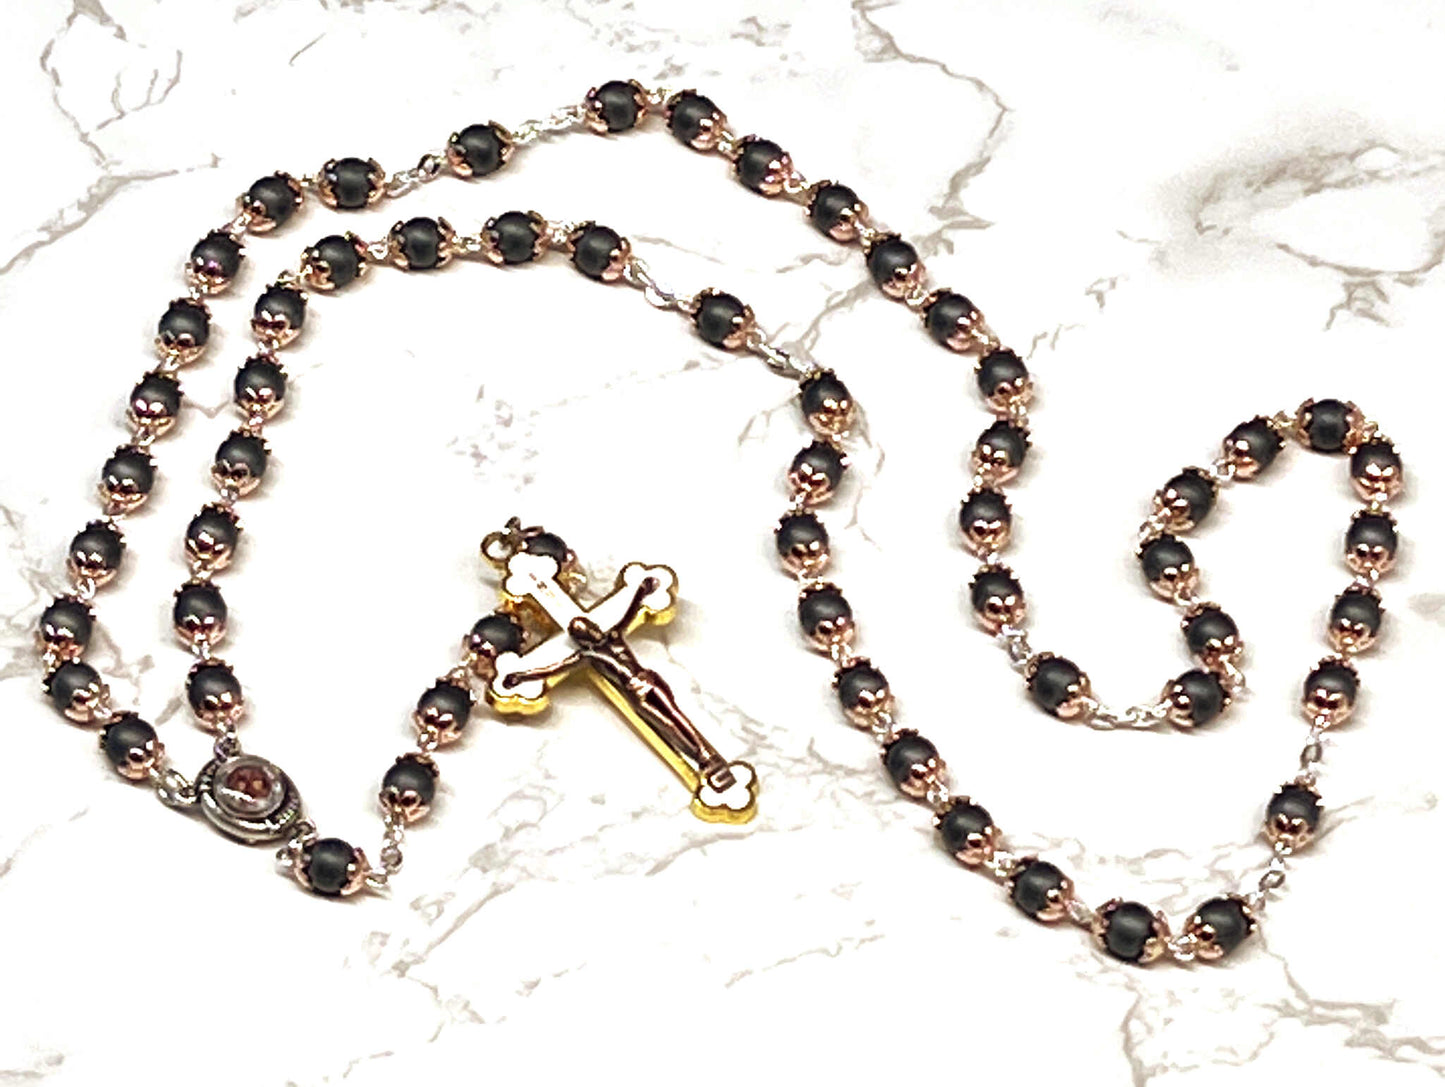 Rosary Necklace with Black Stone Beads and White Crucifix